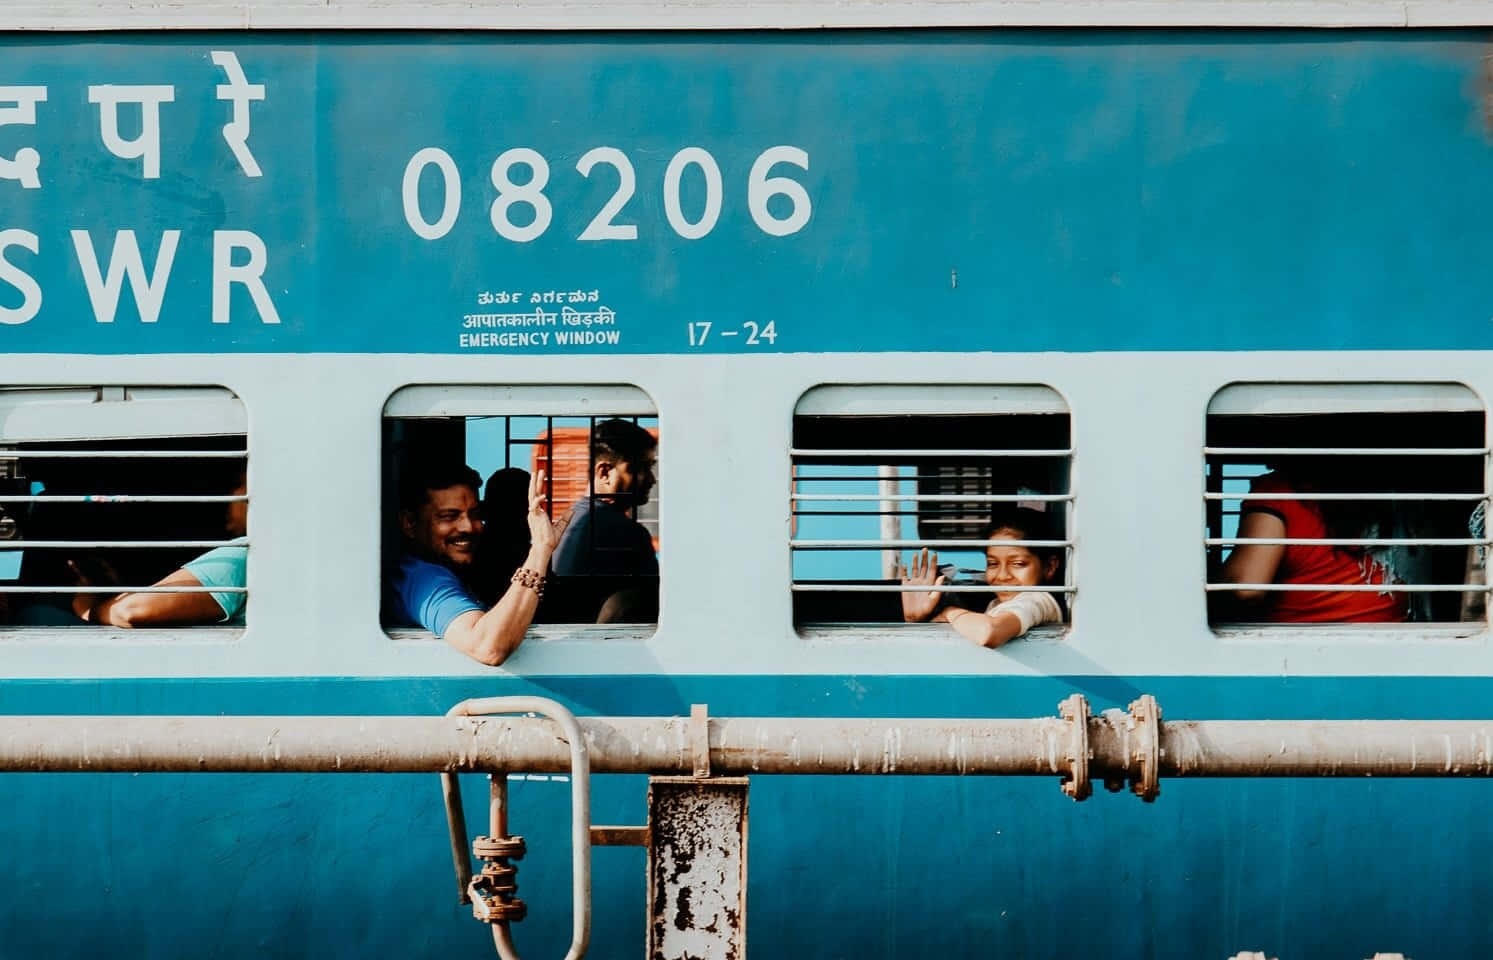 A Blue Train With People Waving Out The Window